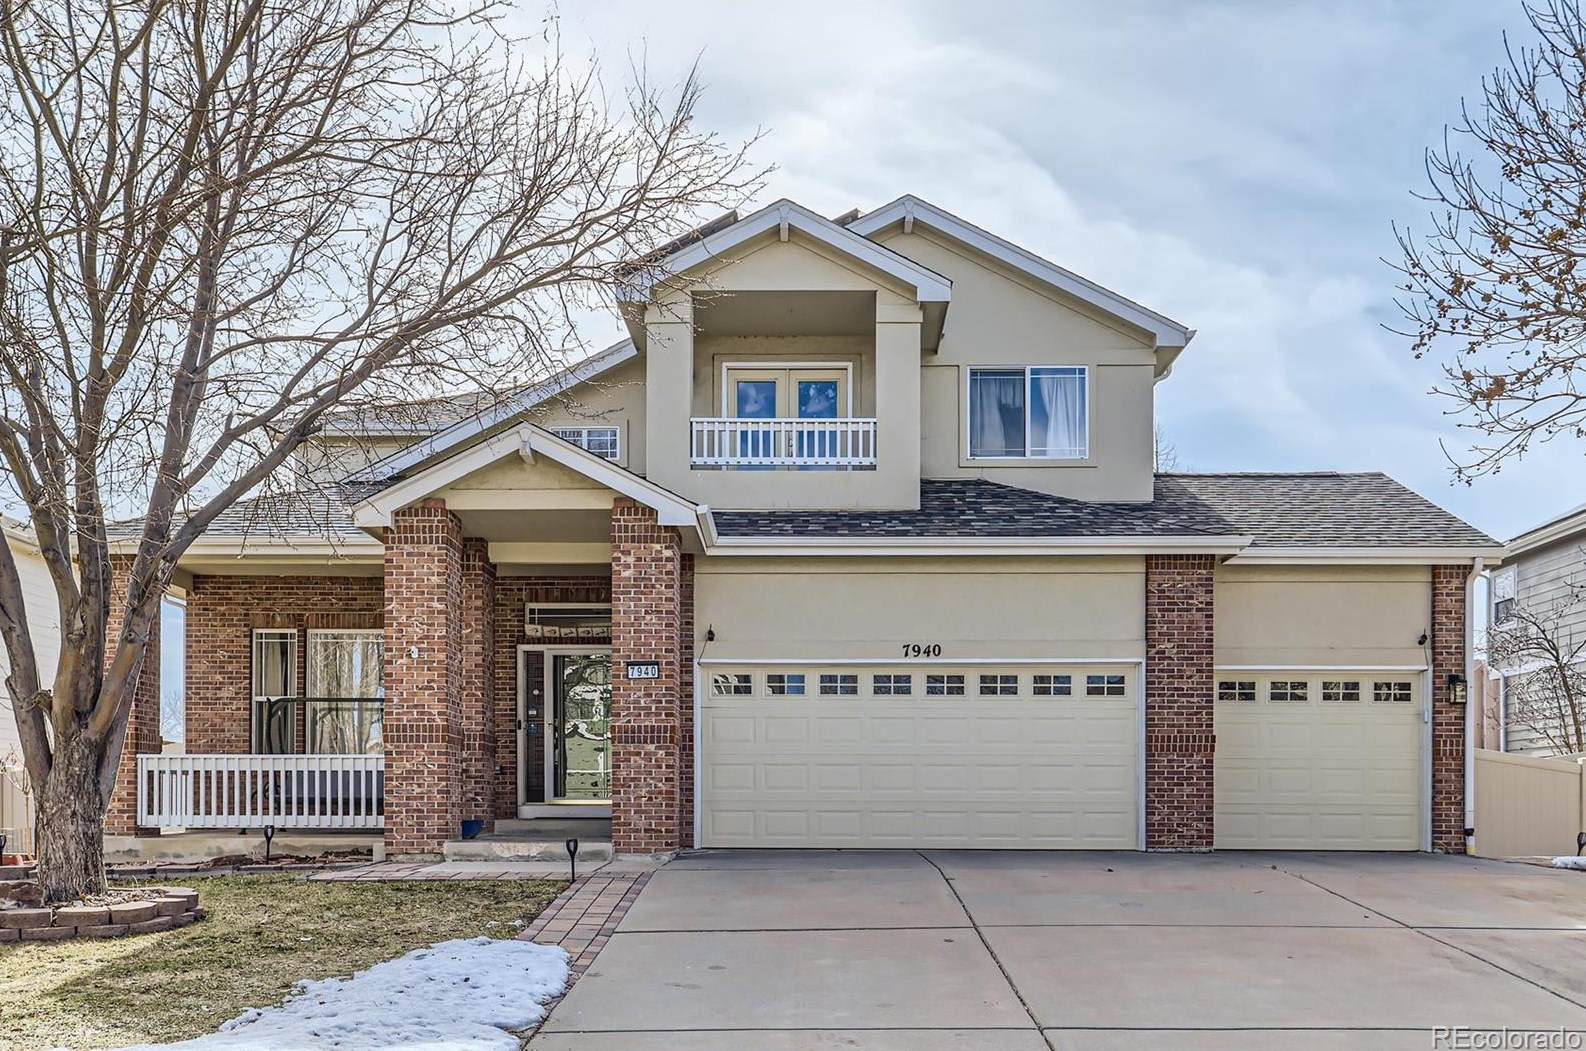 7940 W 94th Pl, Westminster, CO 80021